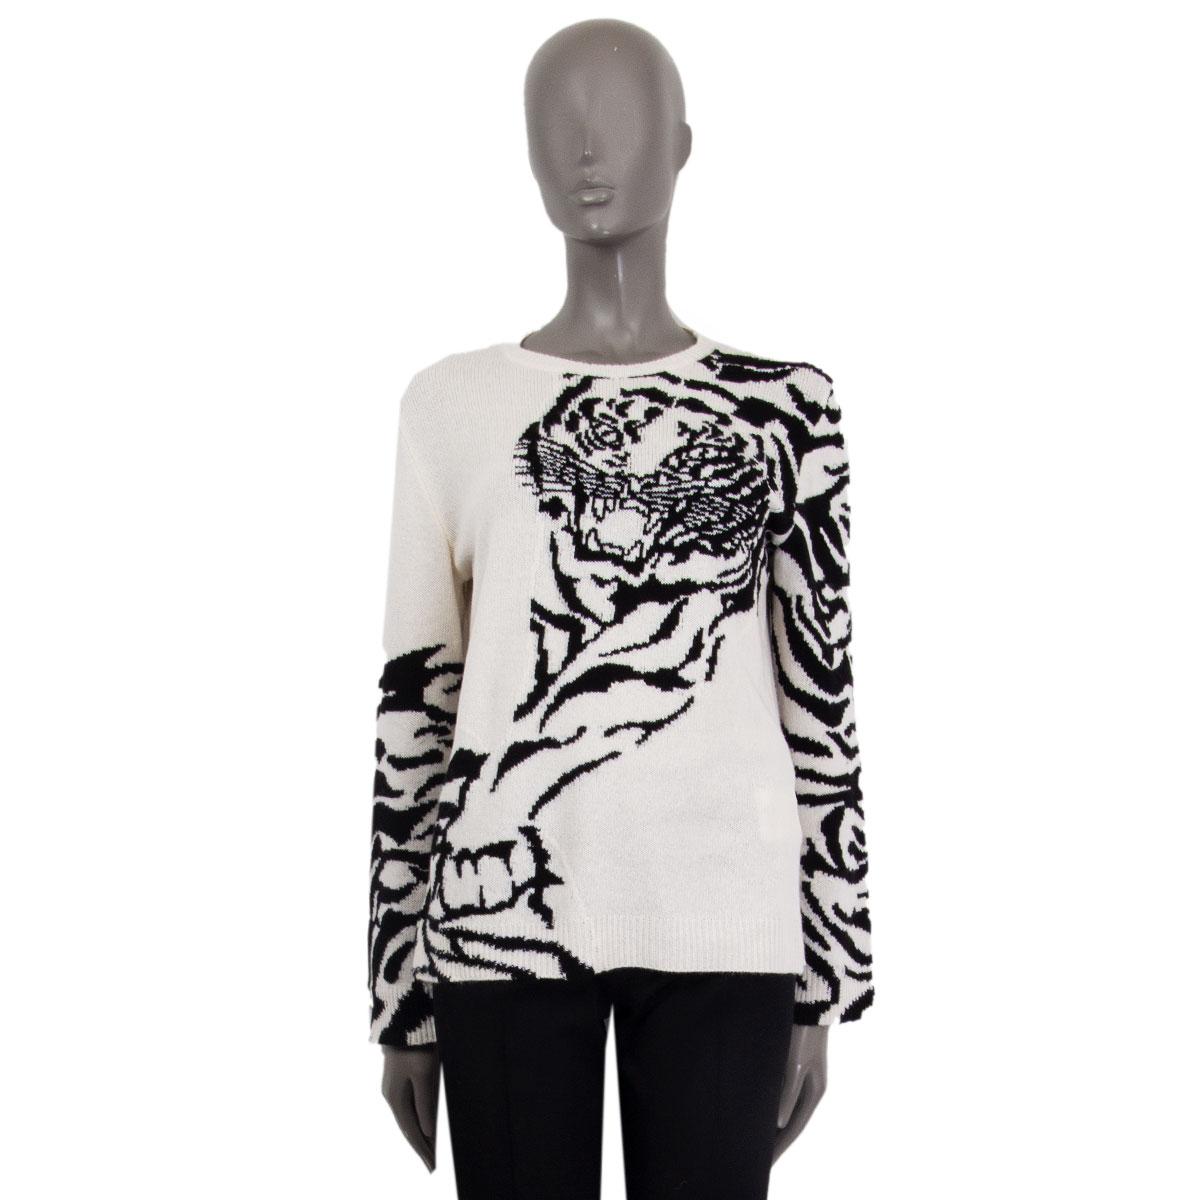 Valentino crew-neck off-white cashmere sweater with black tiger inlay in wool (70%) and cashmere (30%). Has been worn and is in excellent condition. 

Tag Size S 
Size S
Shoulder Width45cm (17.6in)
Bust 102cm (39.8in)
Waist 102cm (39.8in)
Hips 102cm